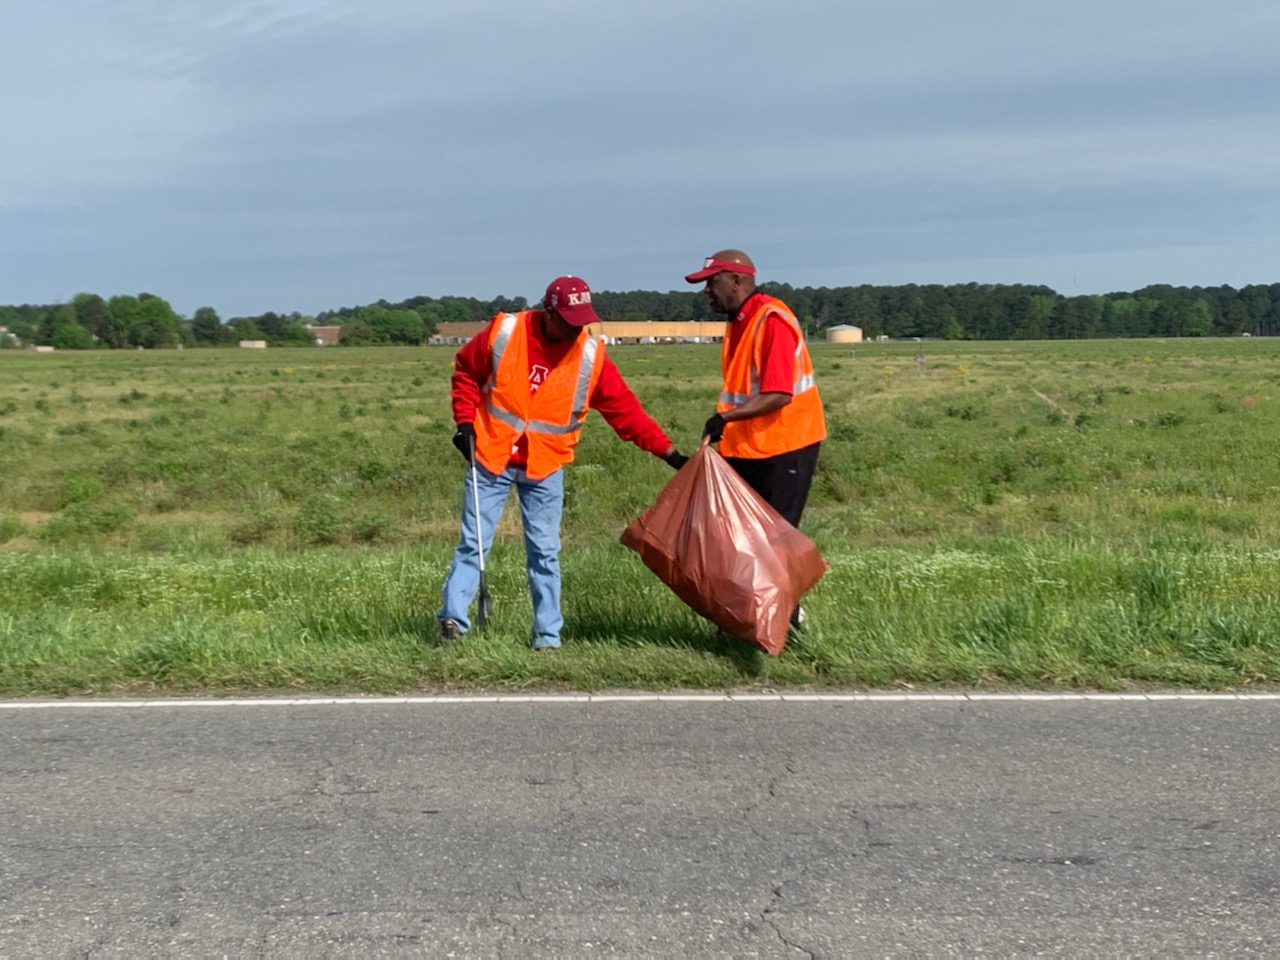 Litter Sweep Pushes Roadside Litter Collection Past 4 Million Pounds